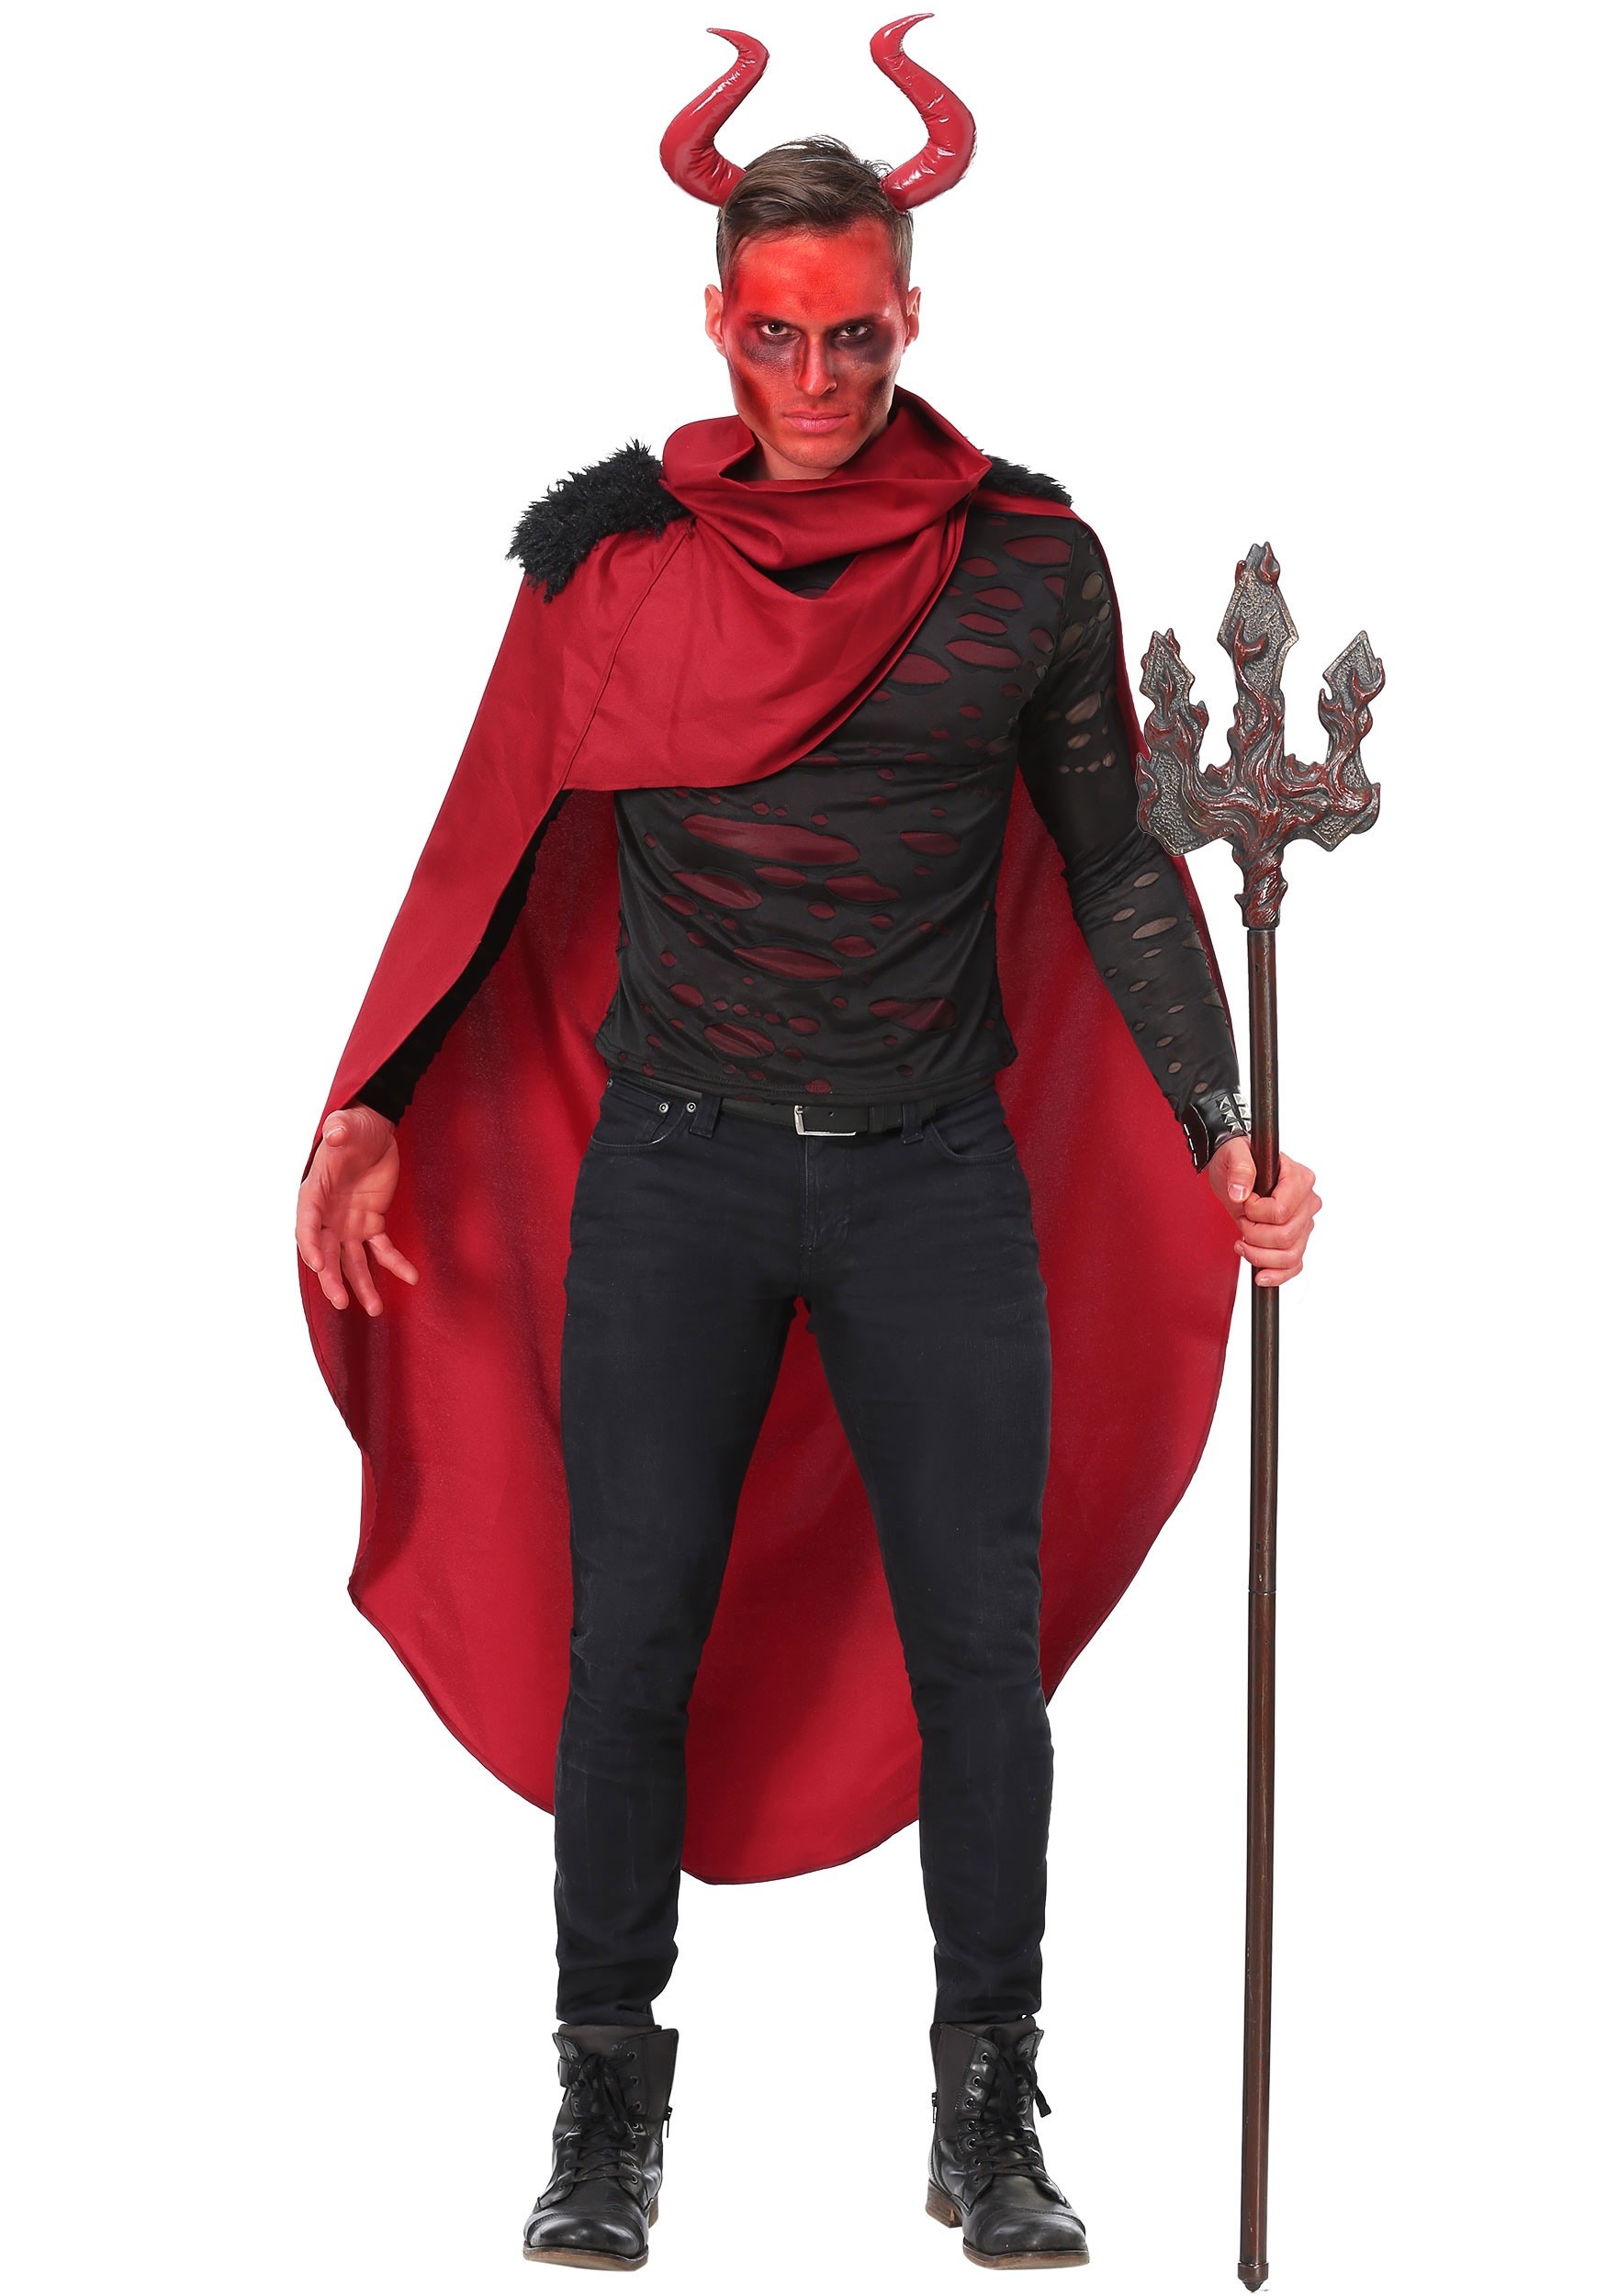 Photos - Fancy Dress Demon FUN Costumes  Lord Costume for Men Black/Red 